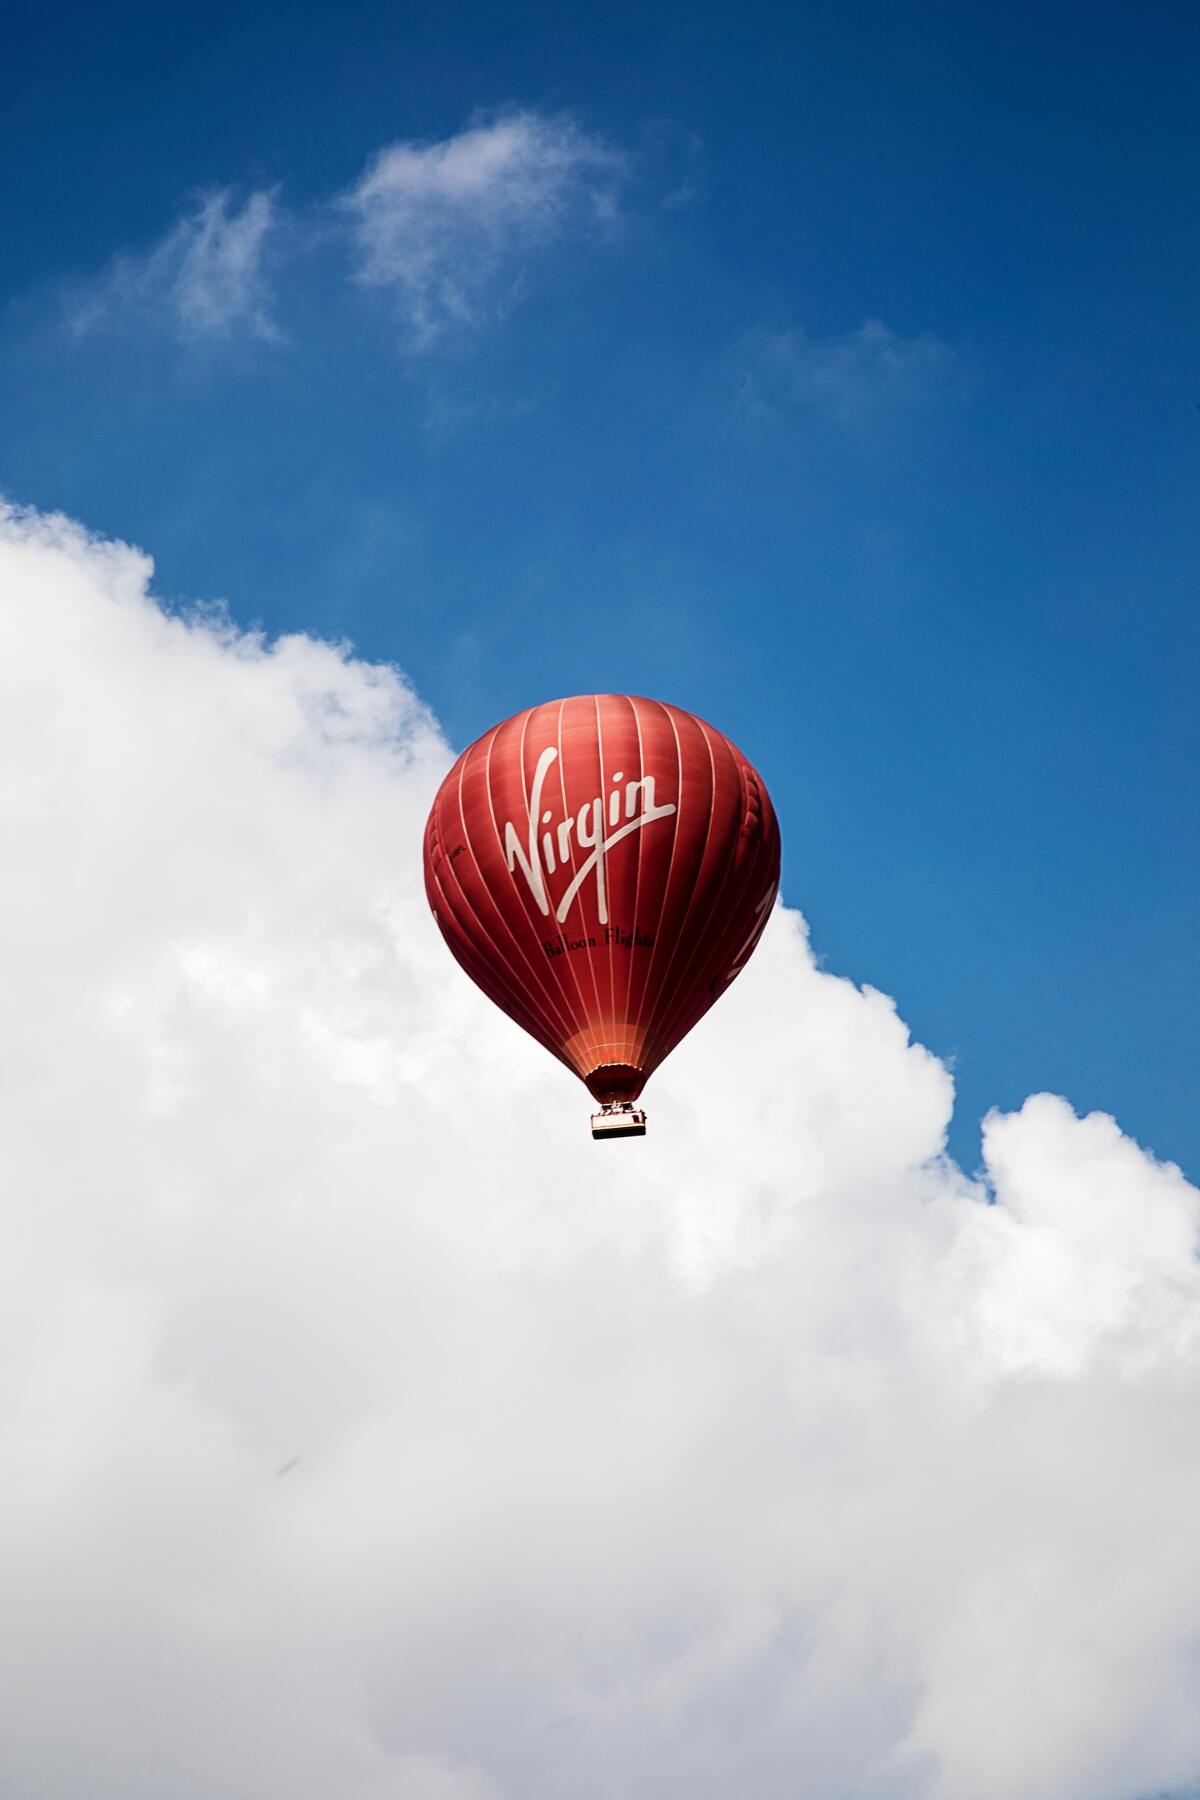 A red air balloon with Virgin’s logo floating up in the air